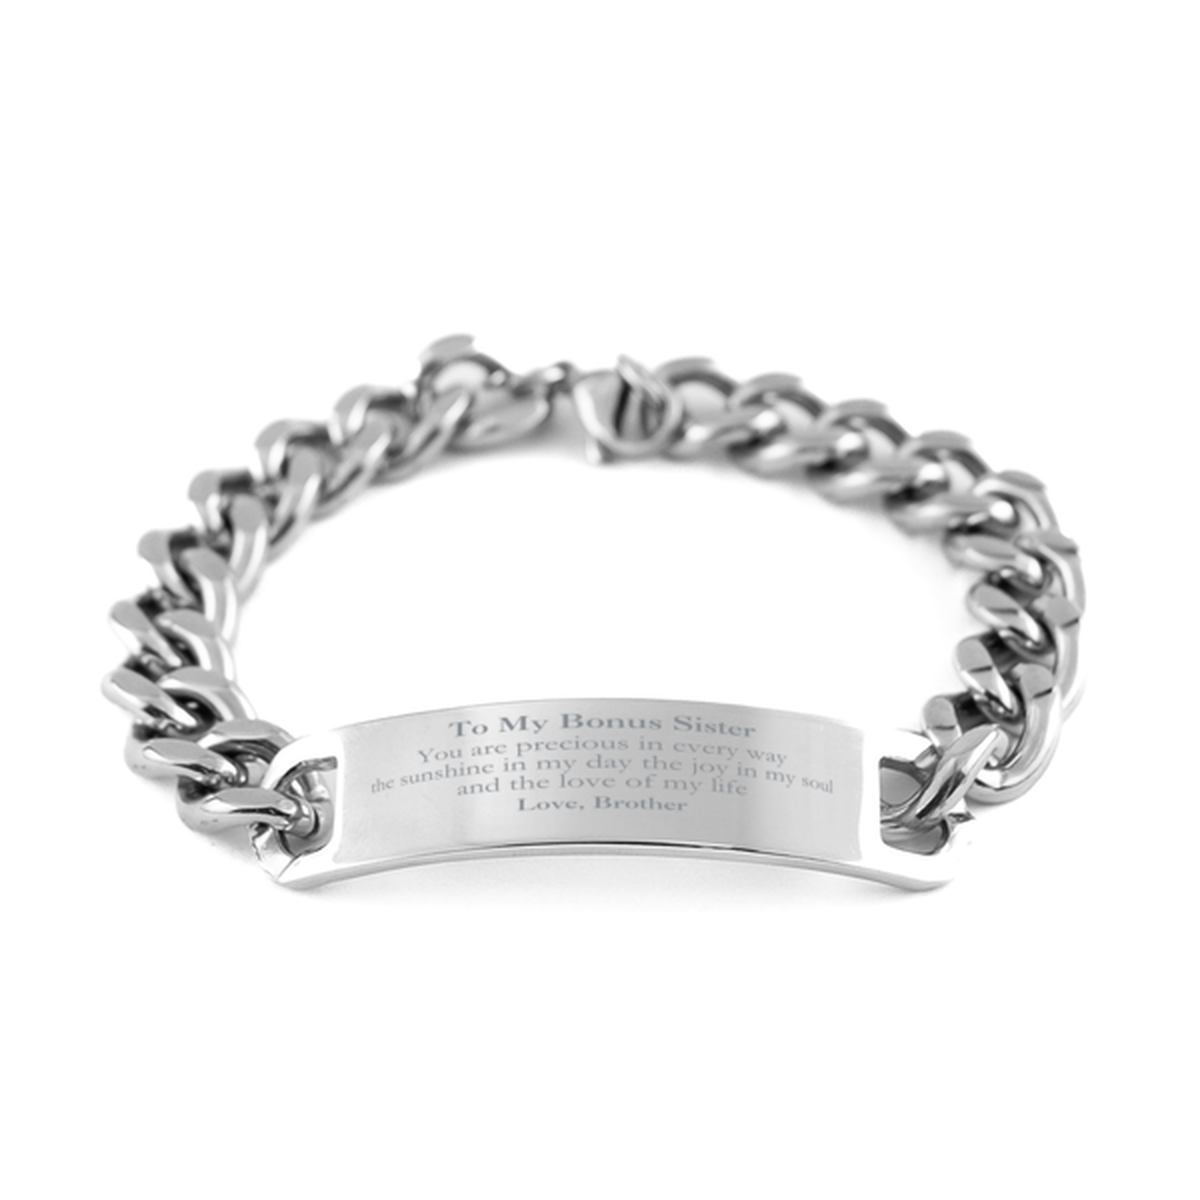 Graduation Gifts for Bonus Sister Cuban Chain Stainless Steel Bracelet Present from Brother, Christmas Bonus Sister Birthday Gifts Bonus Sister You are precious in every way the sunshine in my day. Love, Brother